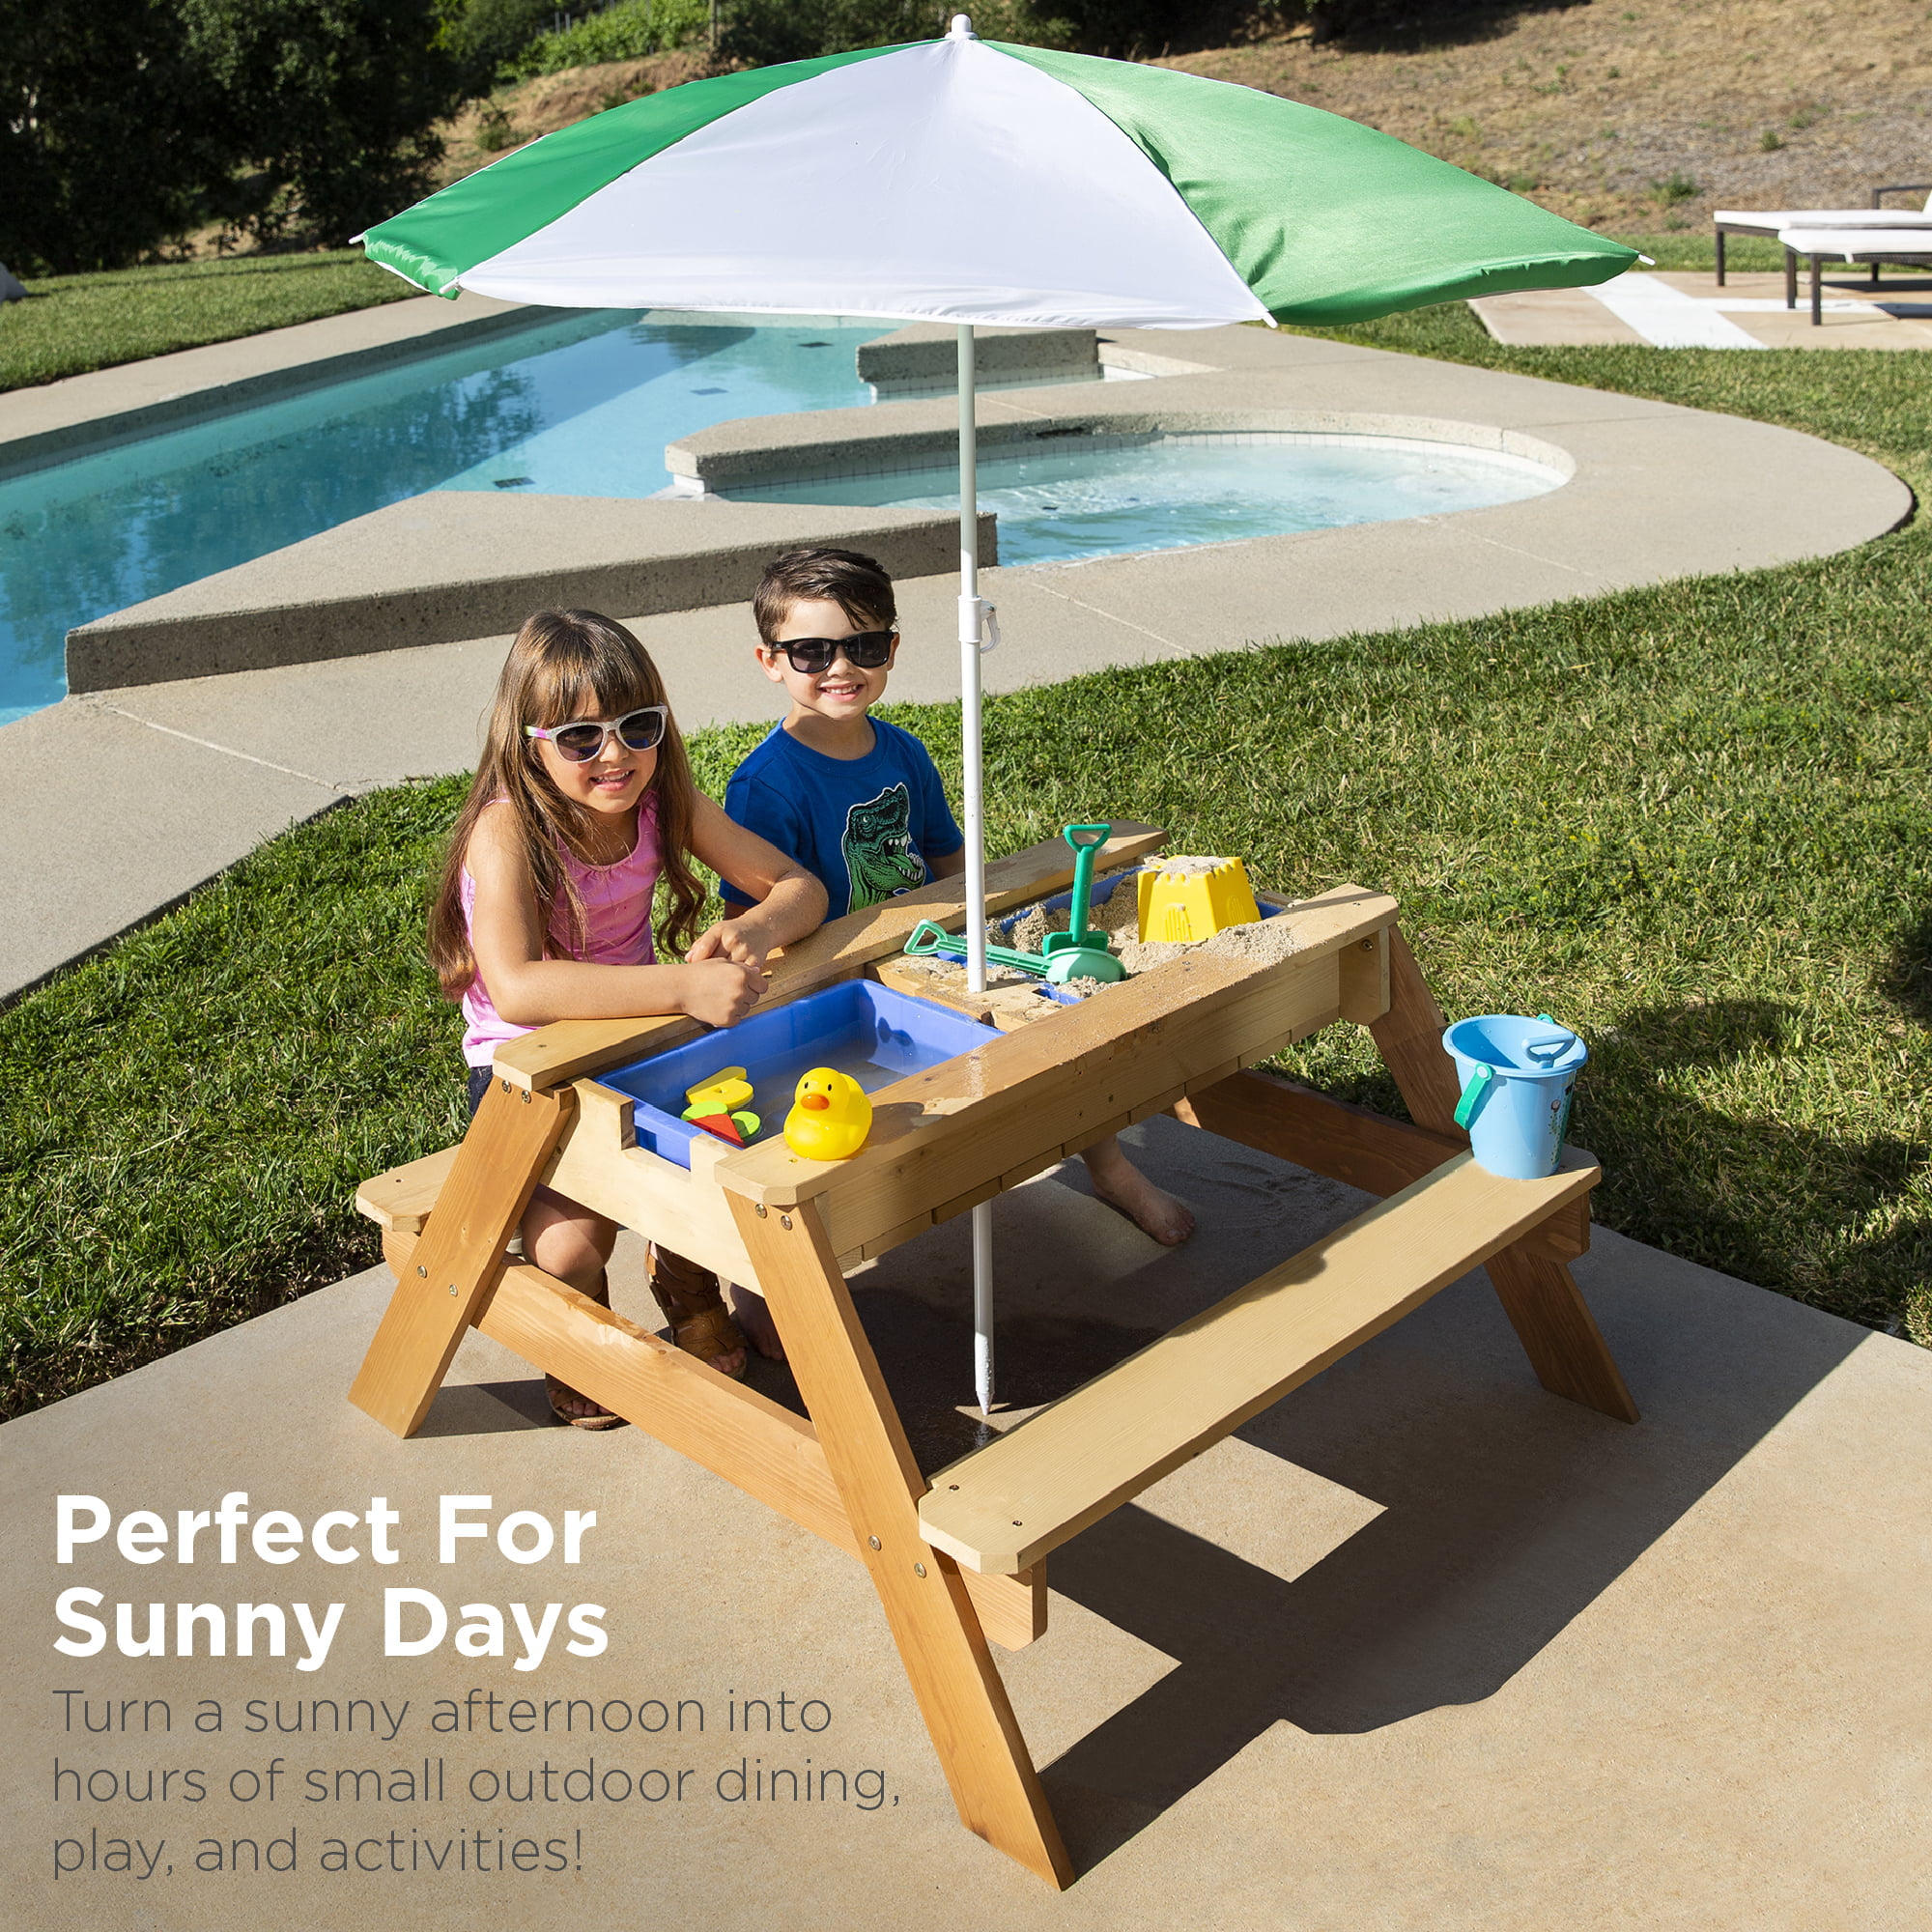 Best Choice Products Kids 3-in-1 Outdoor Convertible Wood Activity Sand & Water Picnic Table w/ Umbrella - Green - image 4 of 8